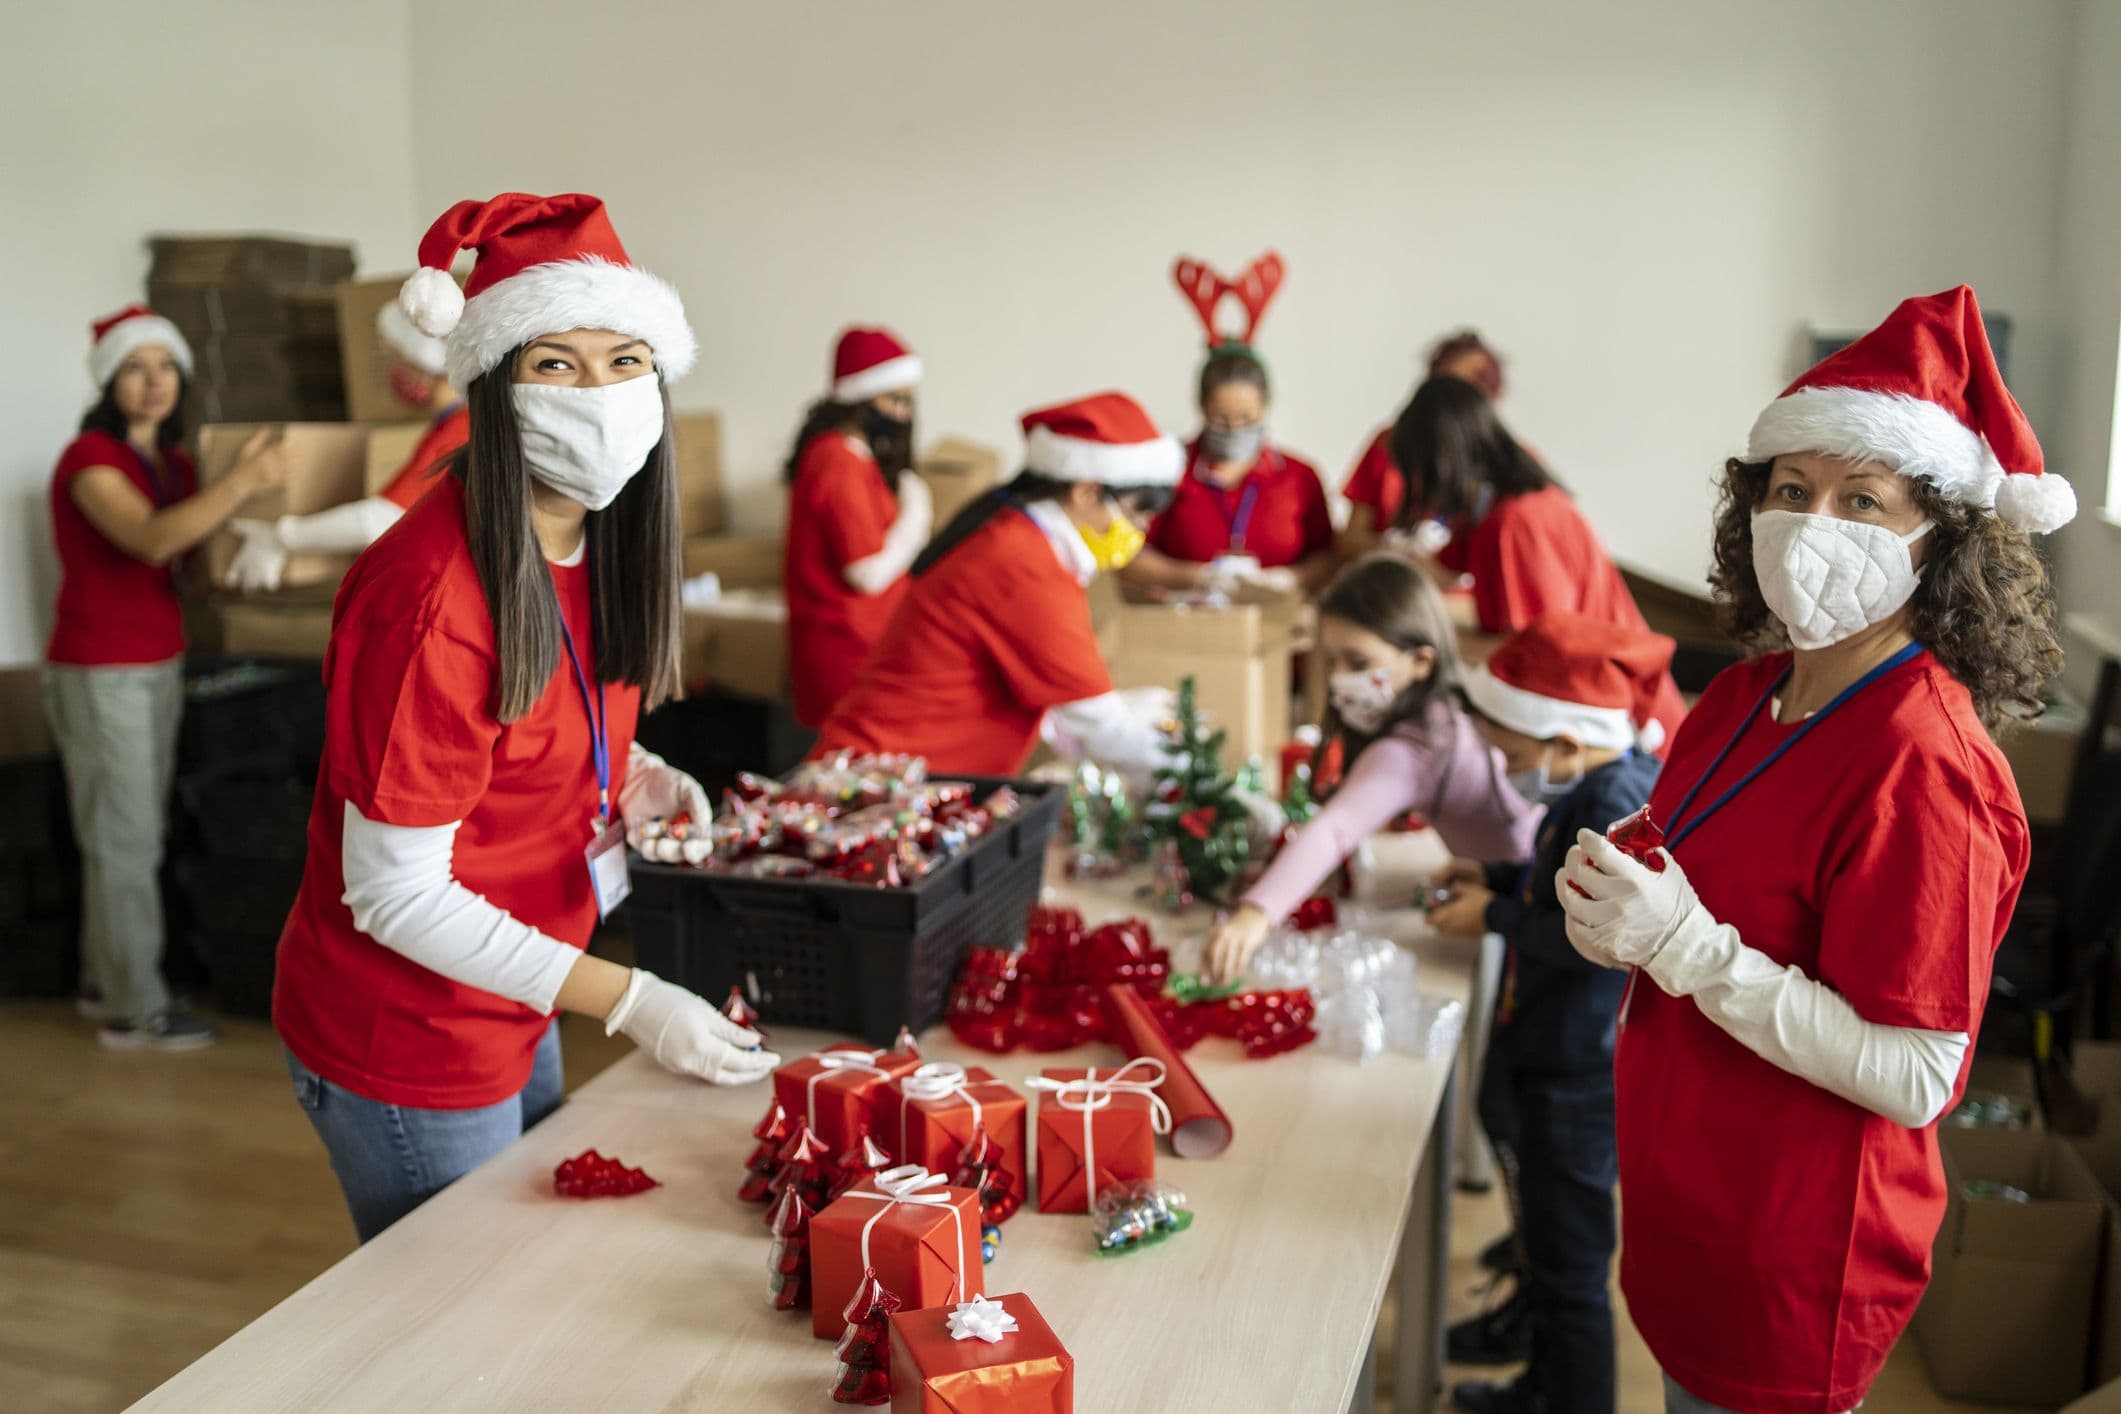 5 Ways You Can Give Back This Holiday Season